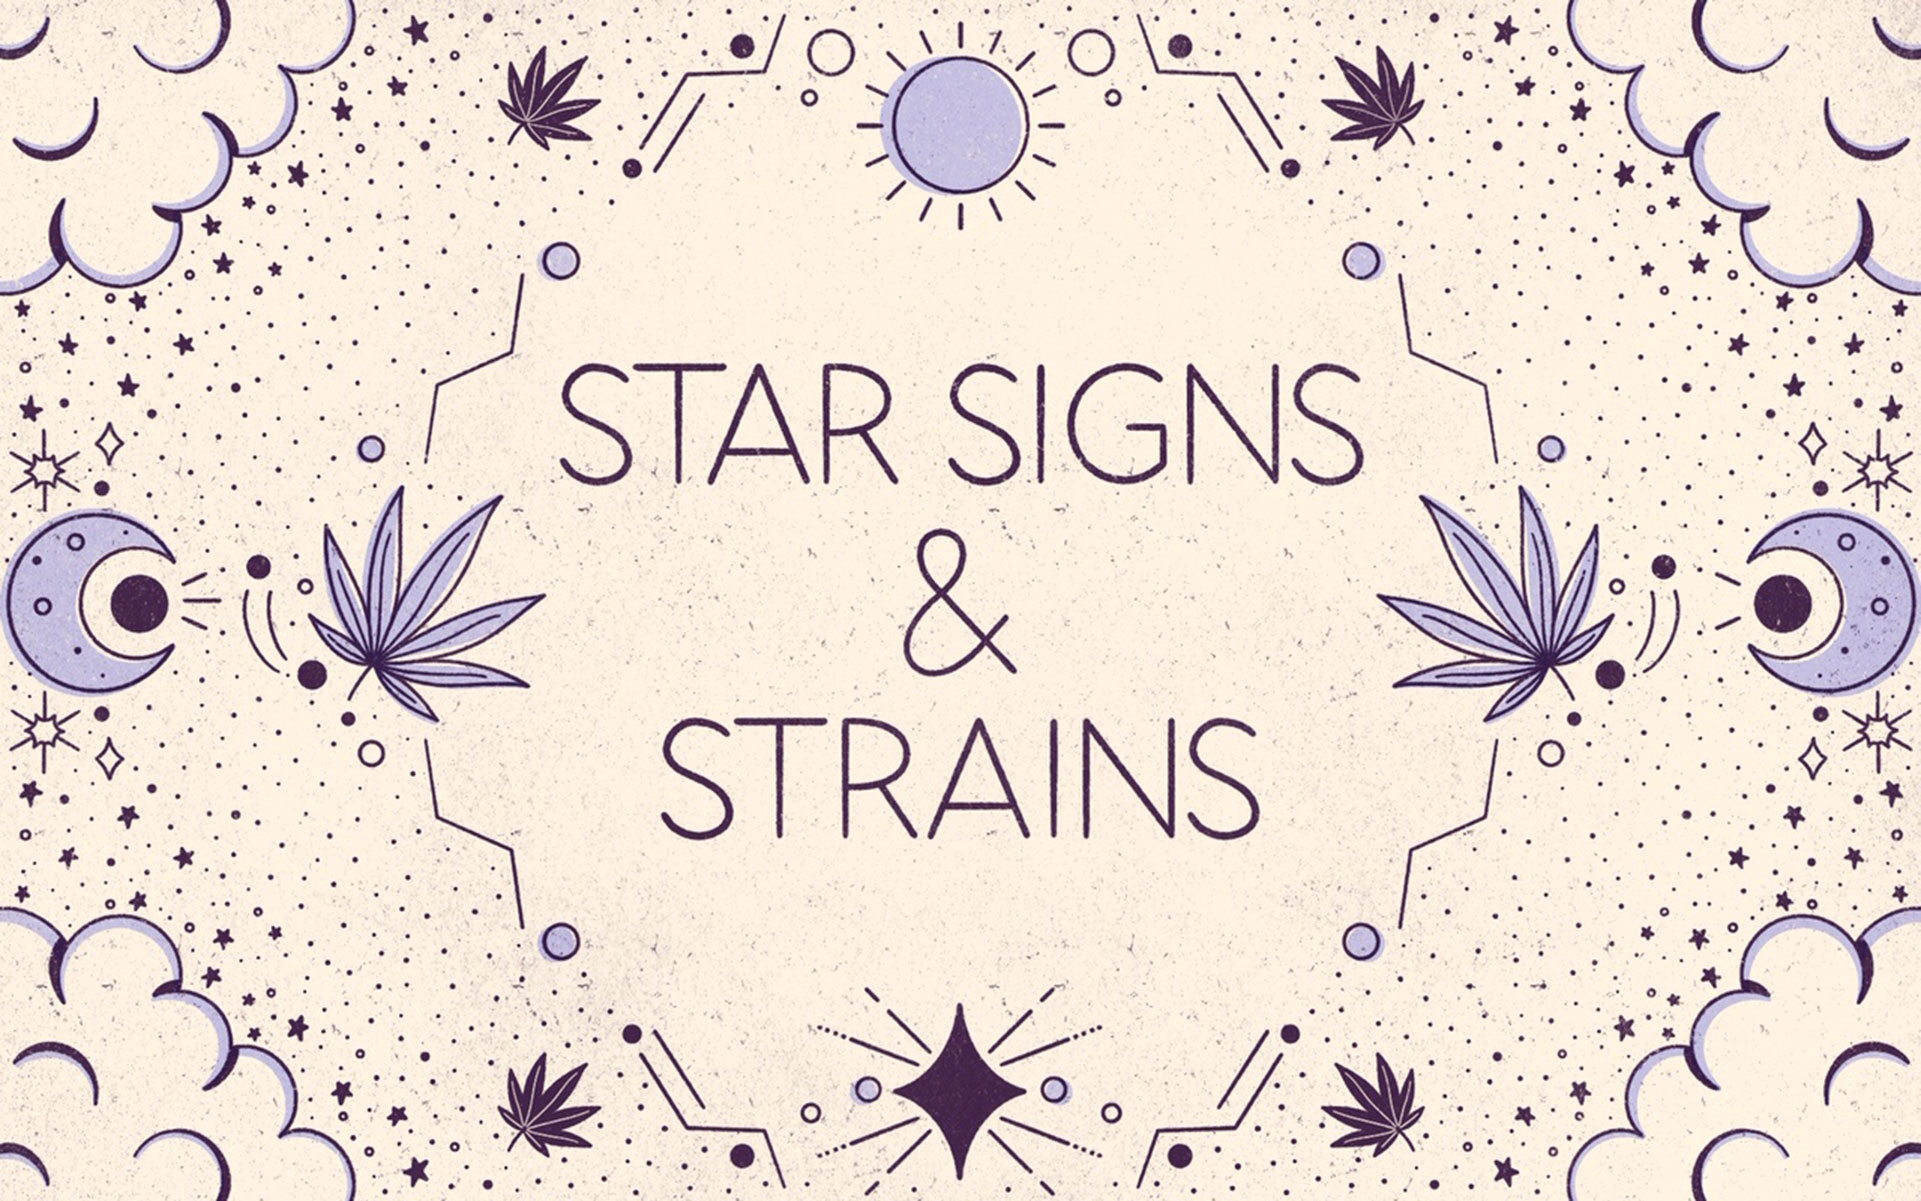 Star signs and cannabis strains: August 2021 horoscopes